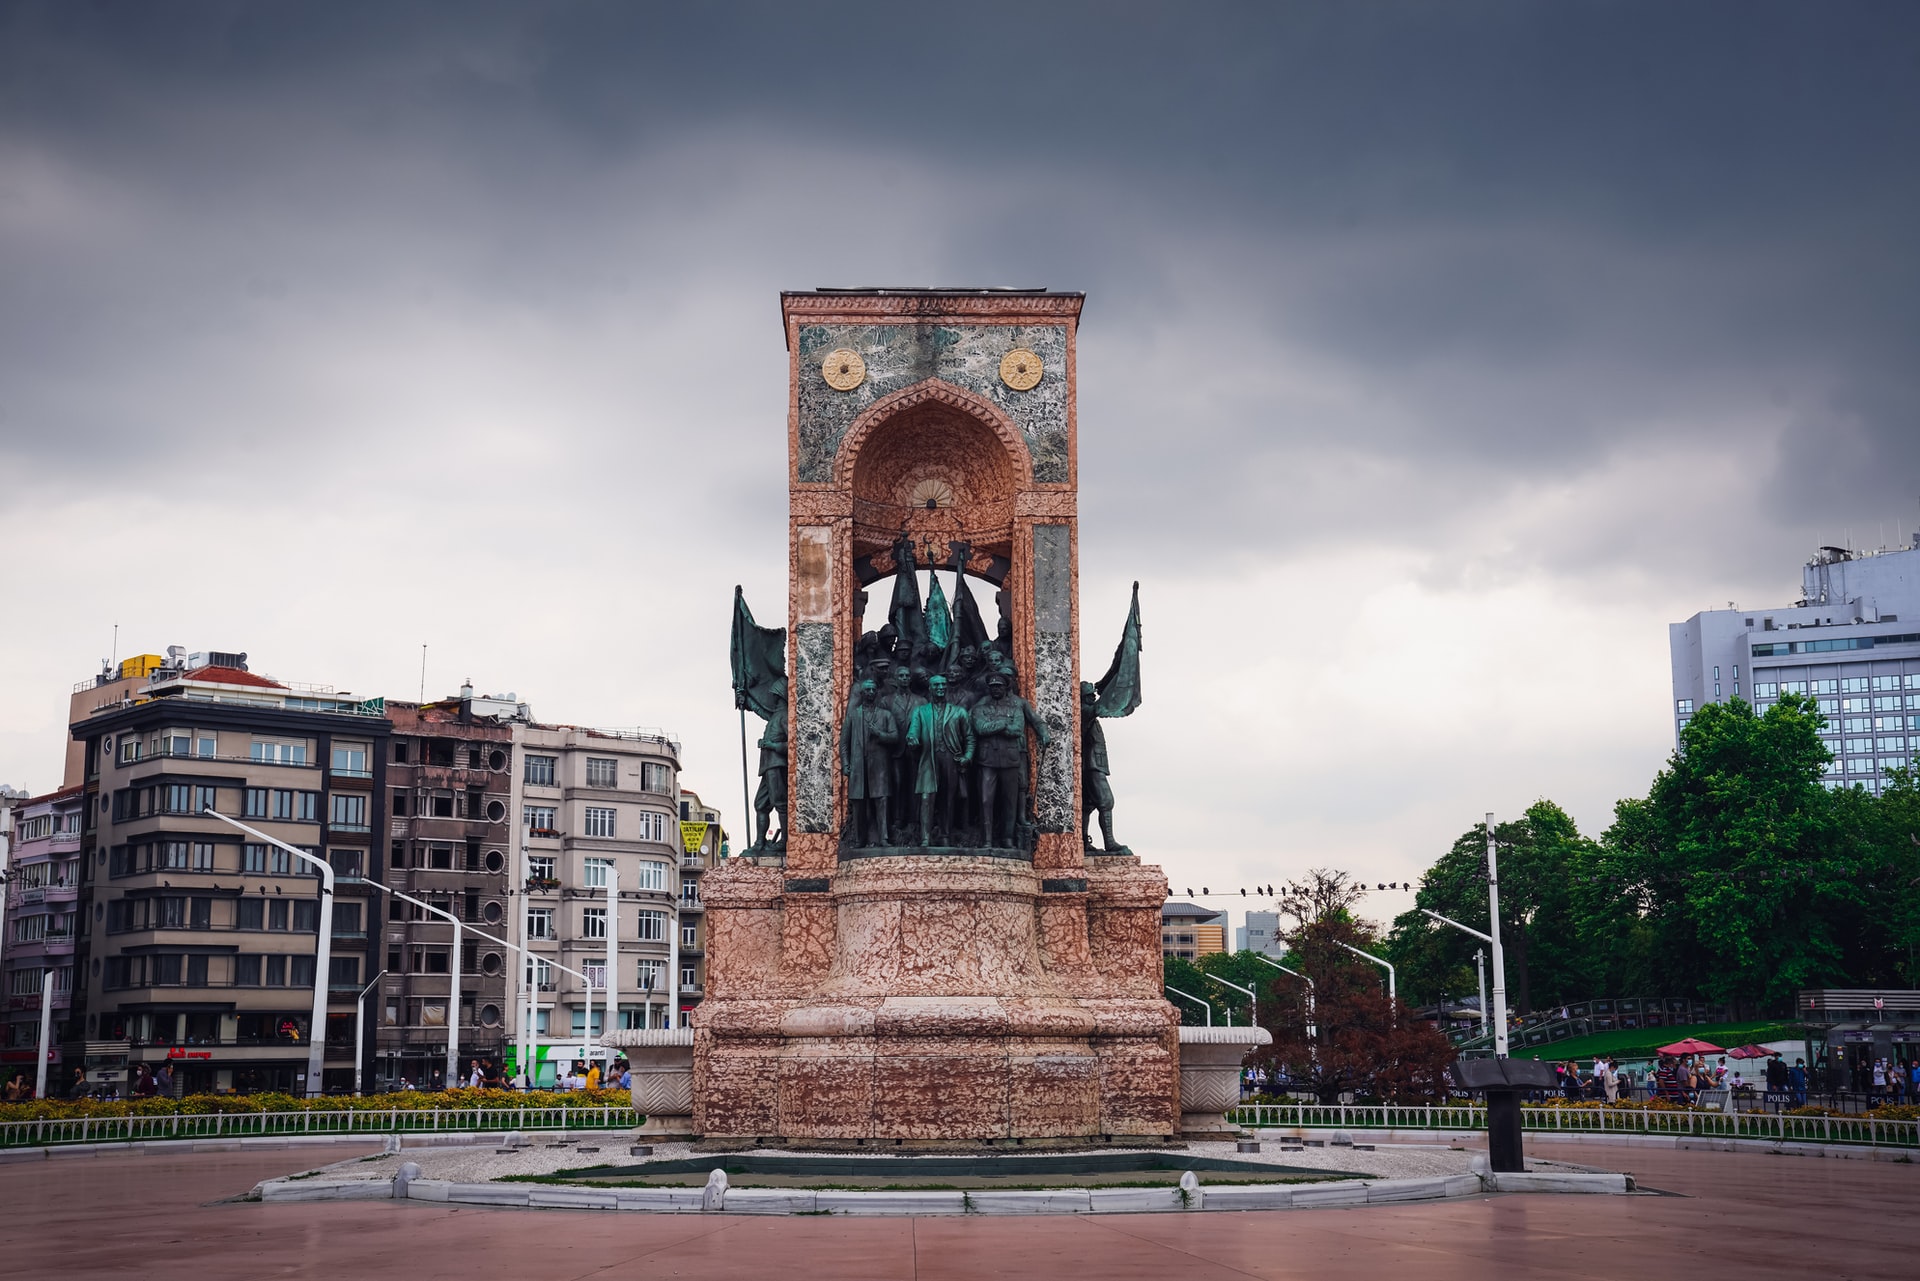 With Taksim Square at its centre, Taksim is a vibrant nightlife, shopping and dining district